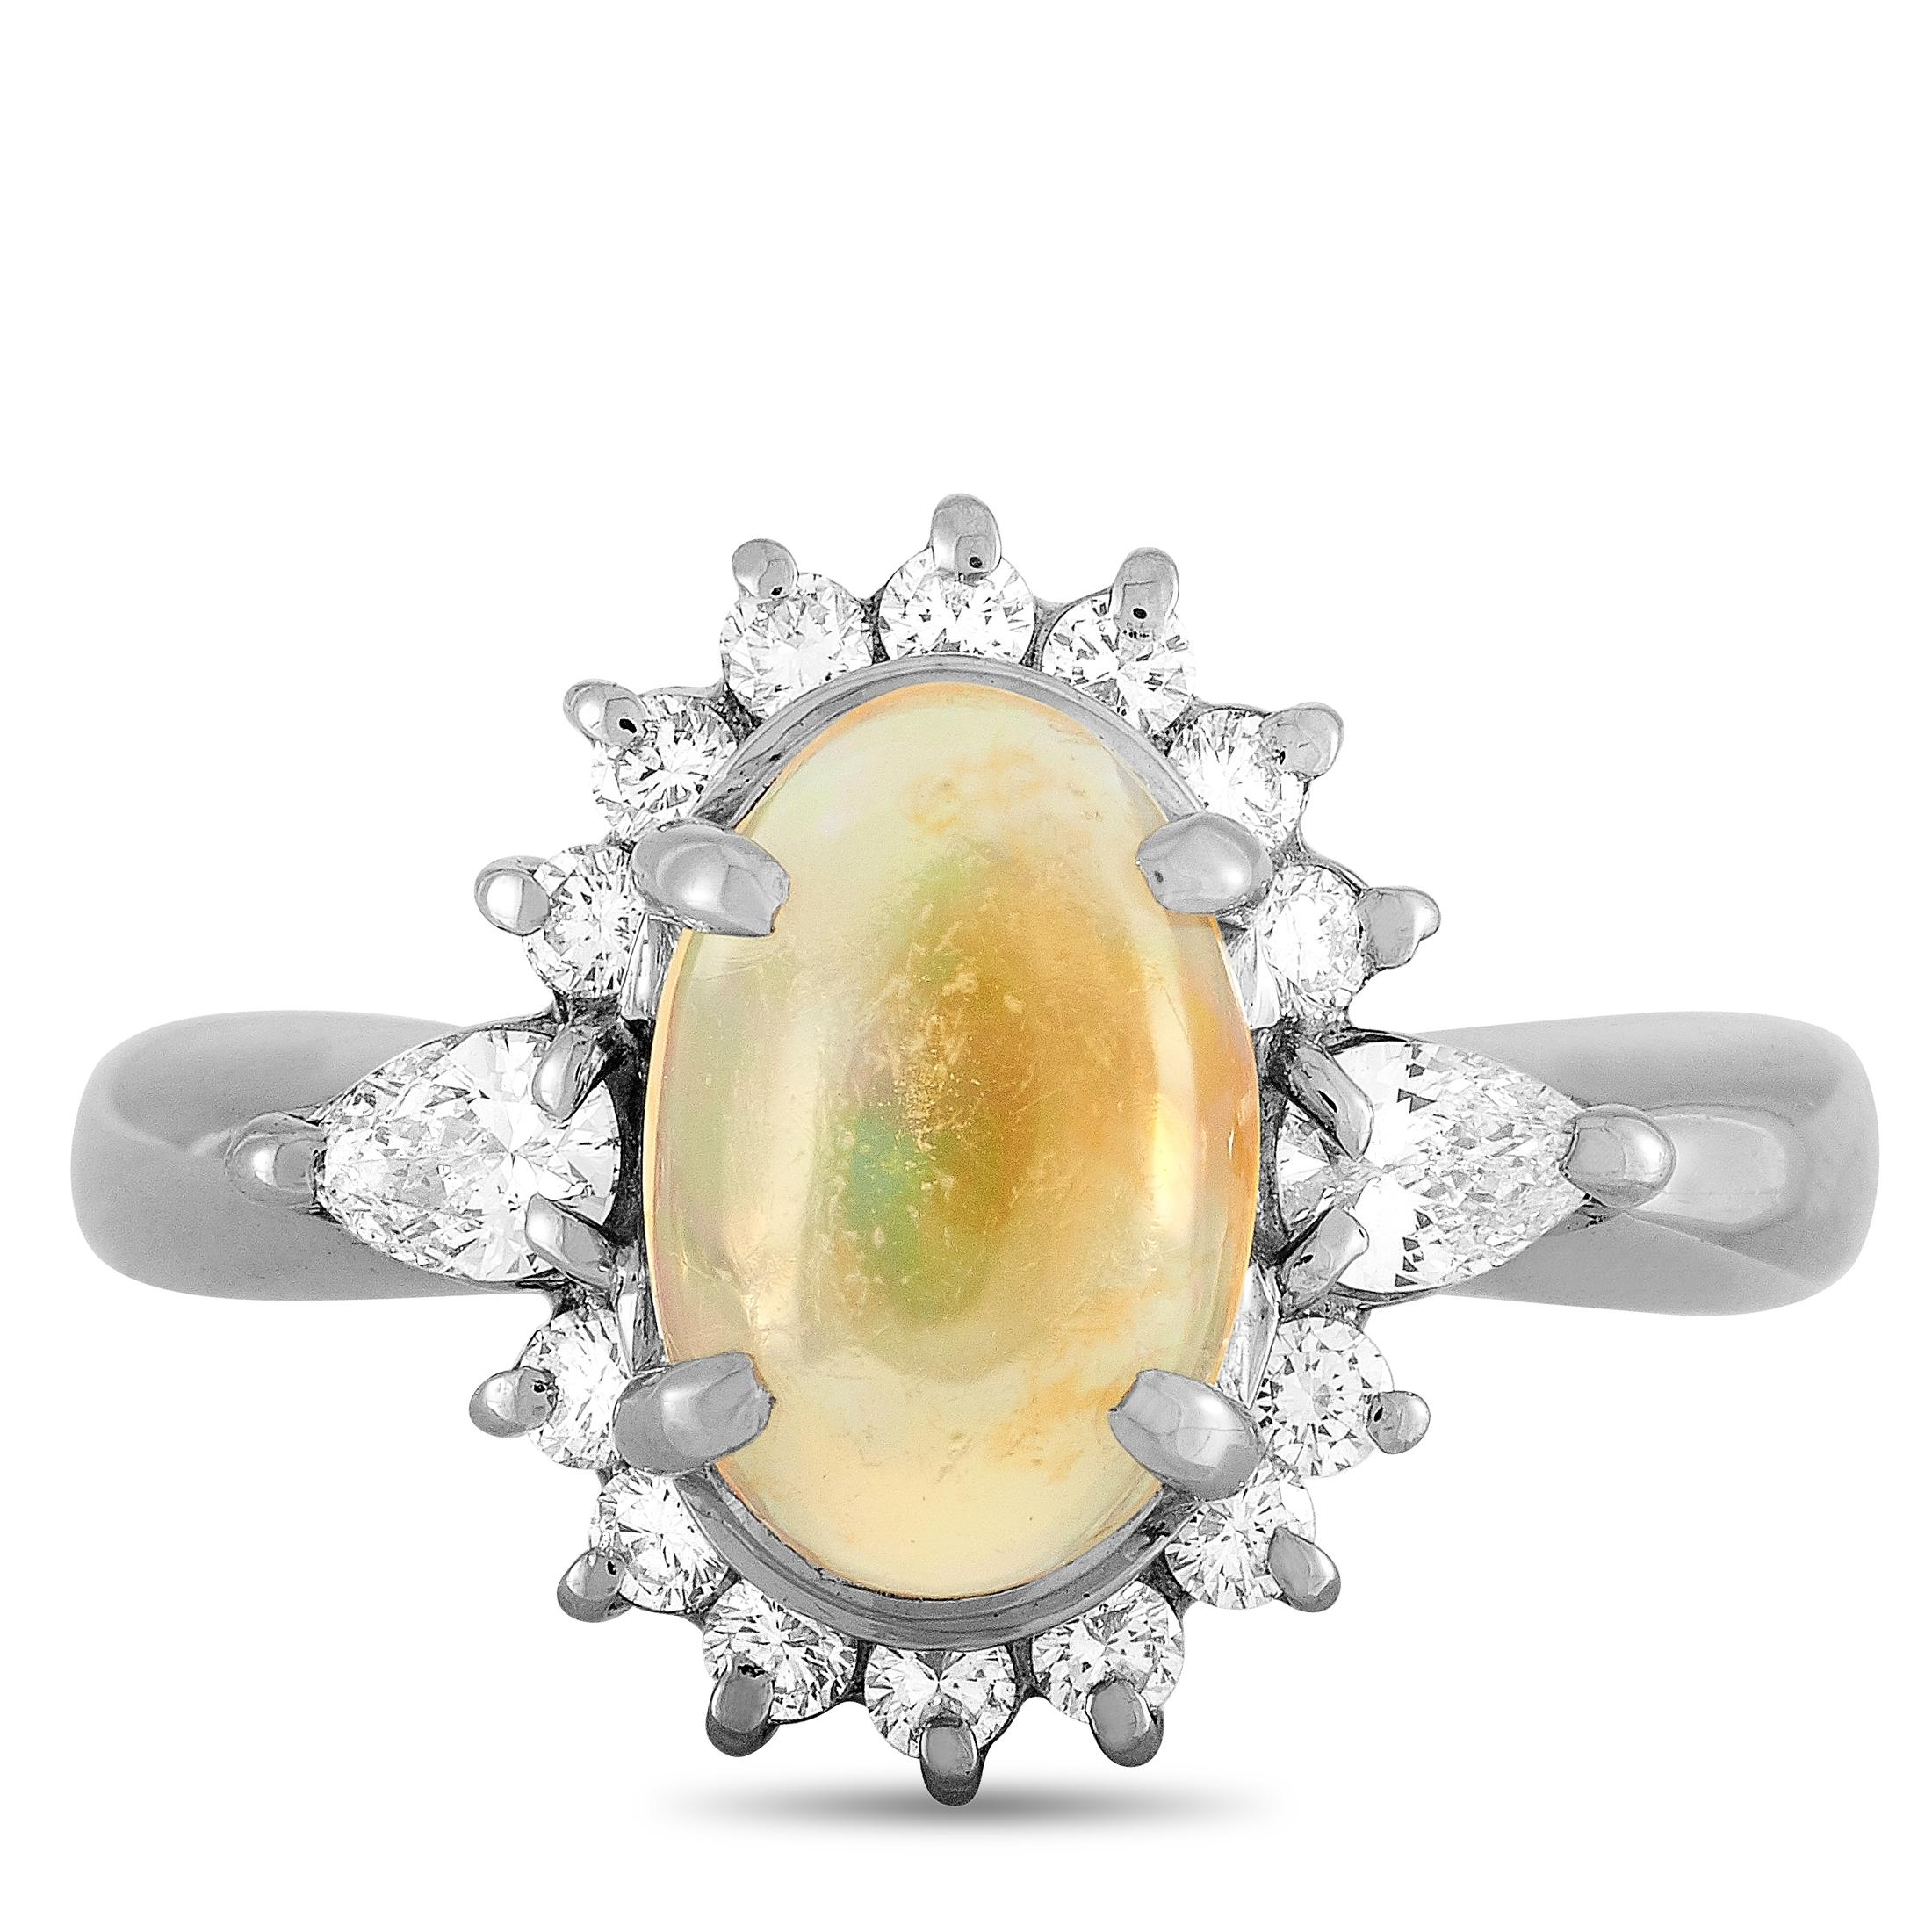 LB Exclusive Platinum 0.54 Carat Round and Pear Diamond and Opal Ring 1